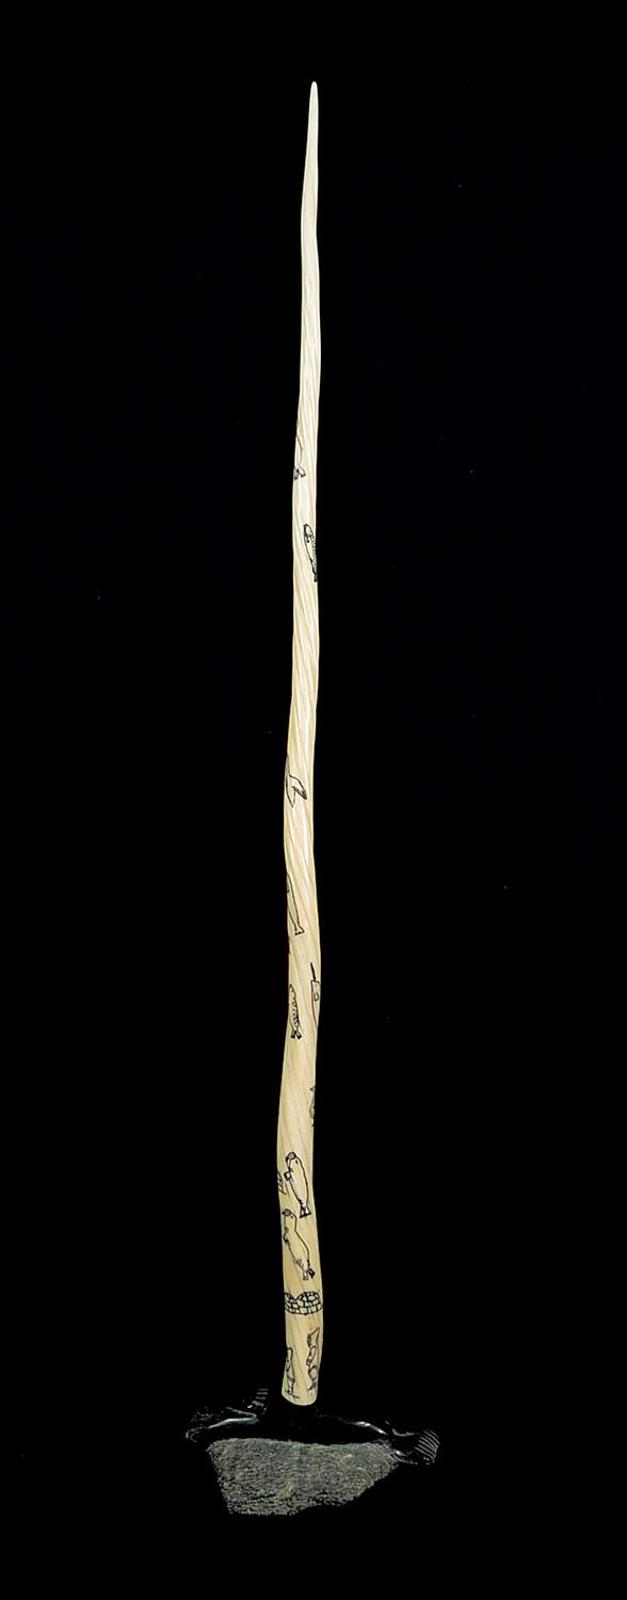 Eegeevudloo Inuit - Untitled - Narwhal Tusk on Seal Base with Arctic Scenes